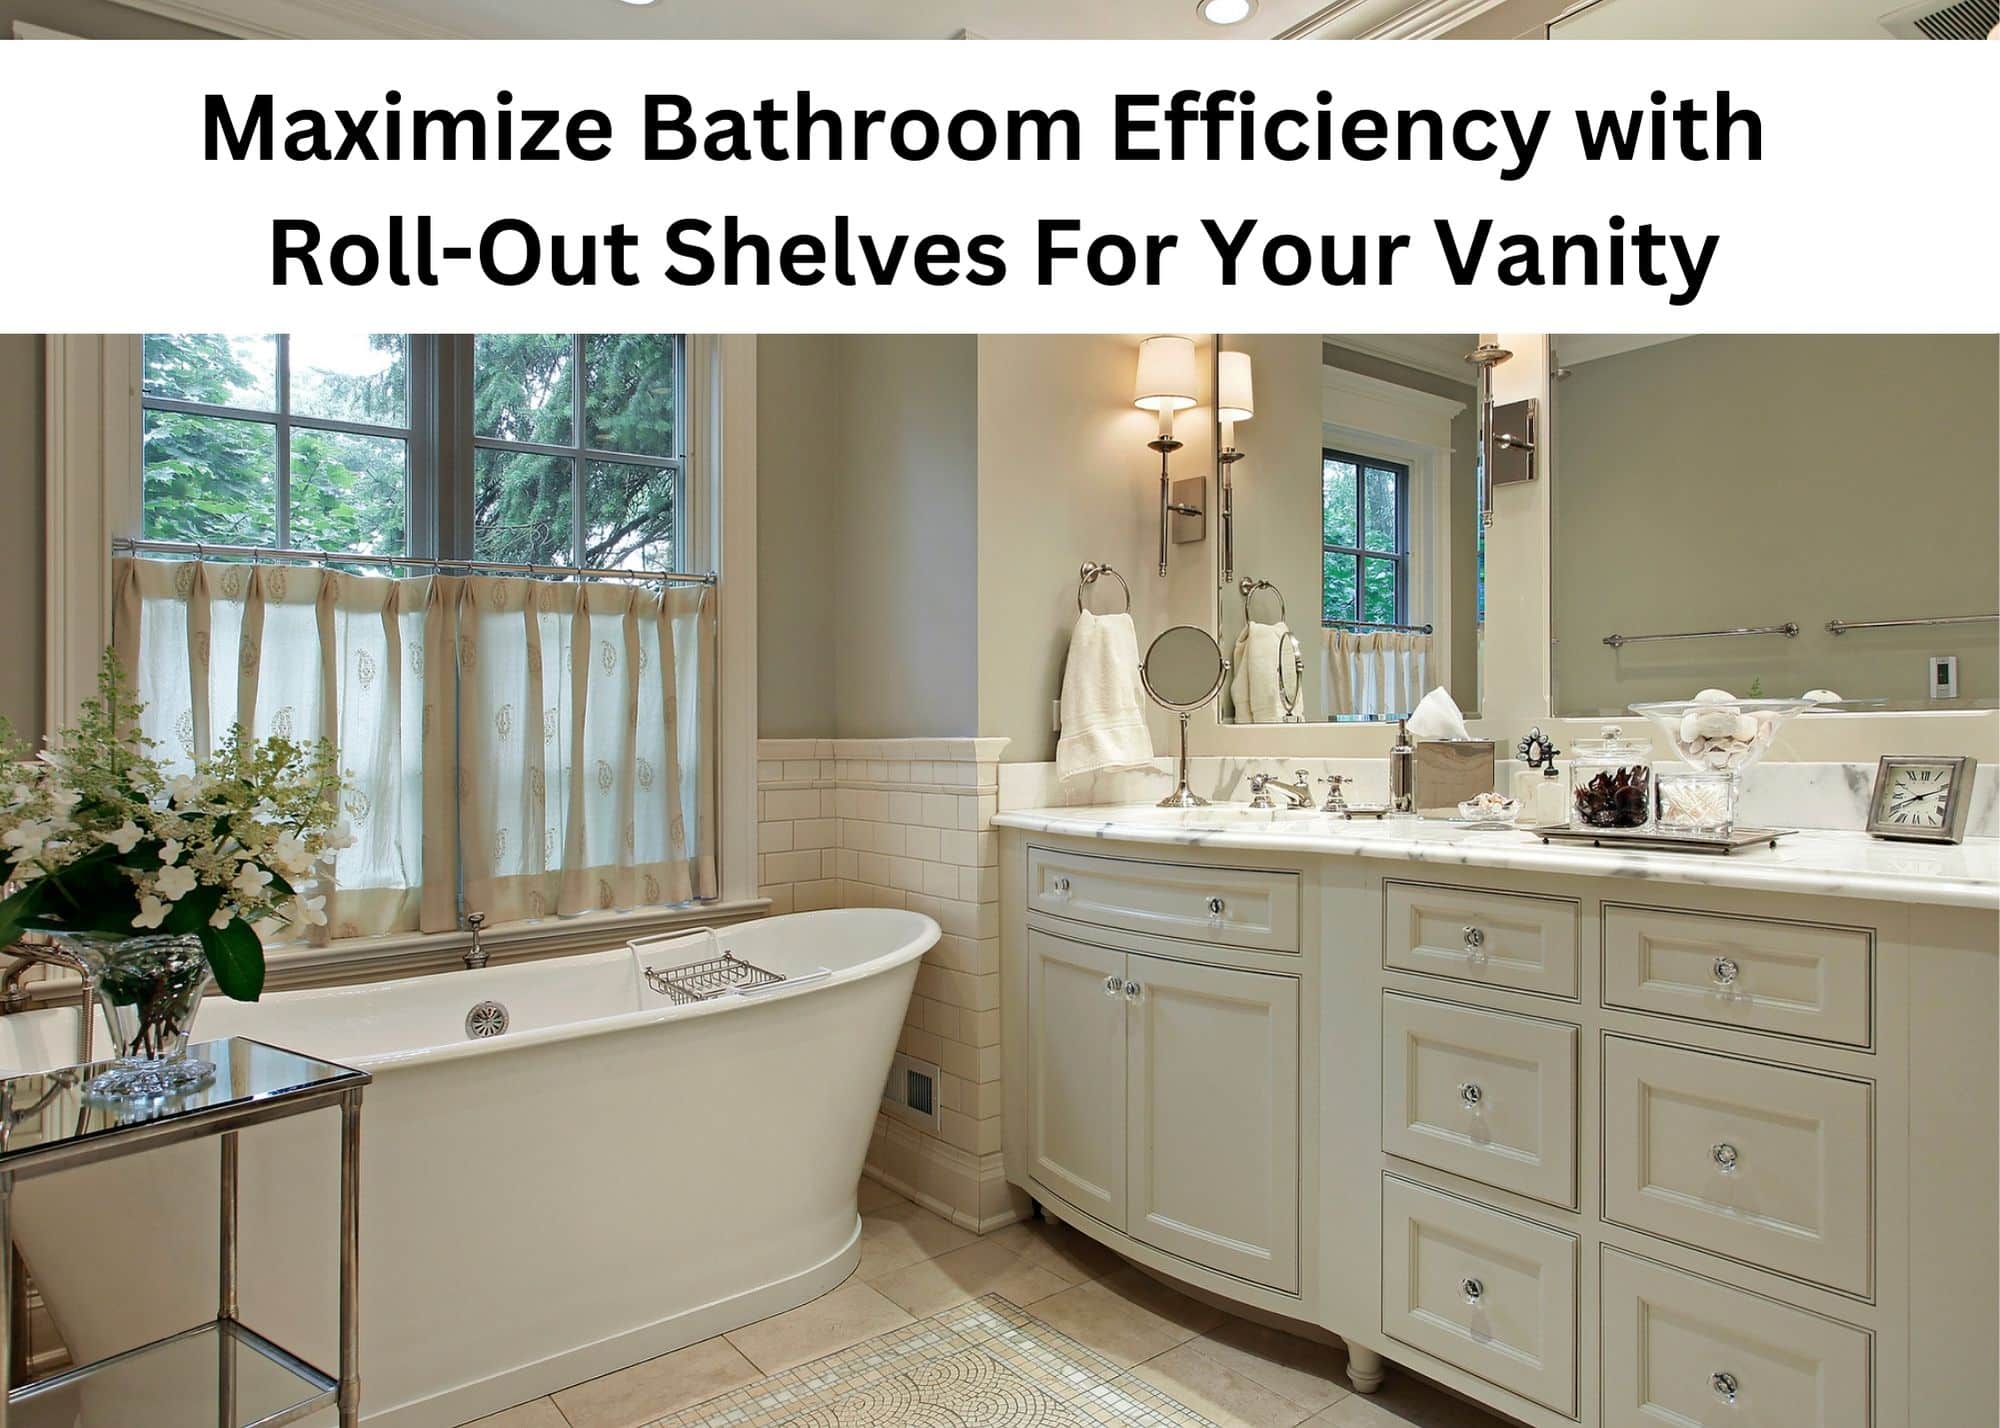 https://allorganized.com/wp-content/uploads/2023/07/Maximize_Bathroom_Efficiency_with_Roll-Out_Shelves_For_Your_Vanity.jpg